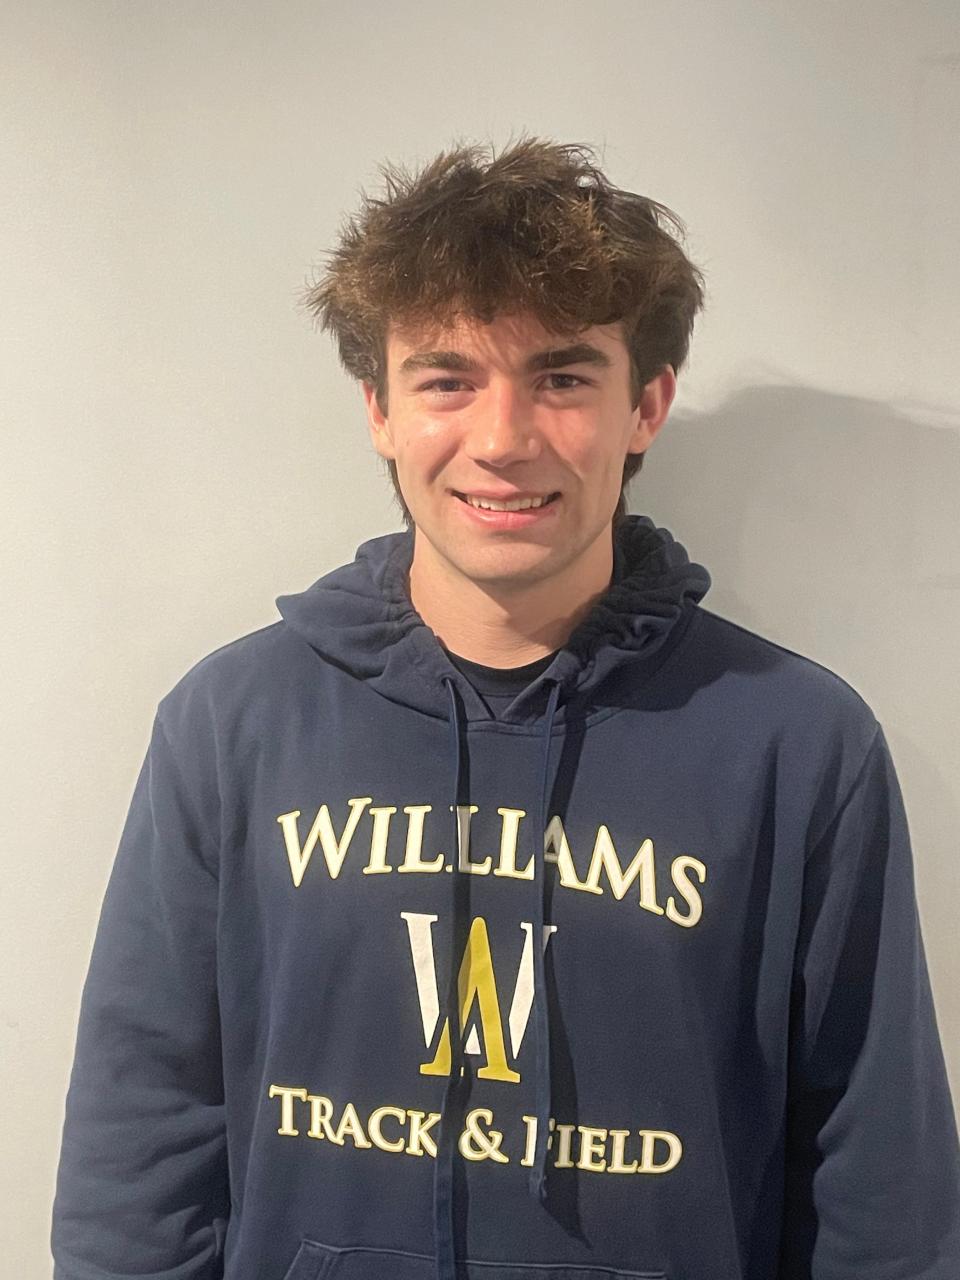 Eamonn Fennell of Archbishop Williams has been named to The Patriot Ledger/Enterprise All-Scholastic Boys Cross Country Team.